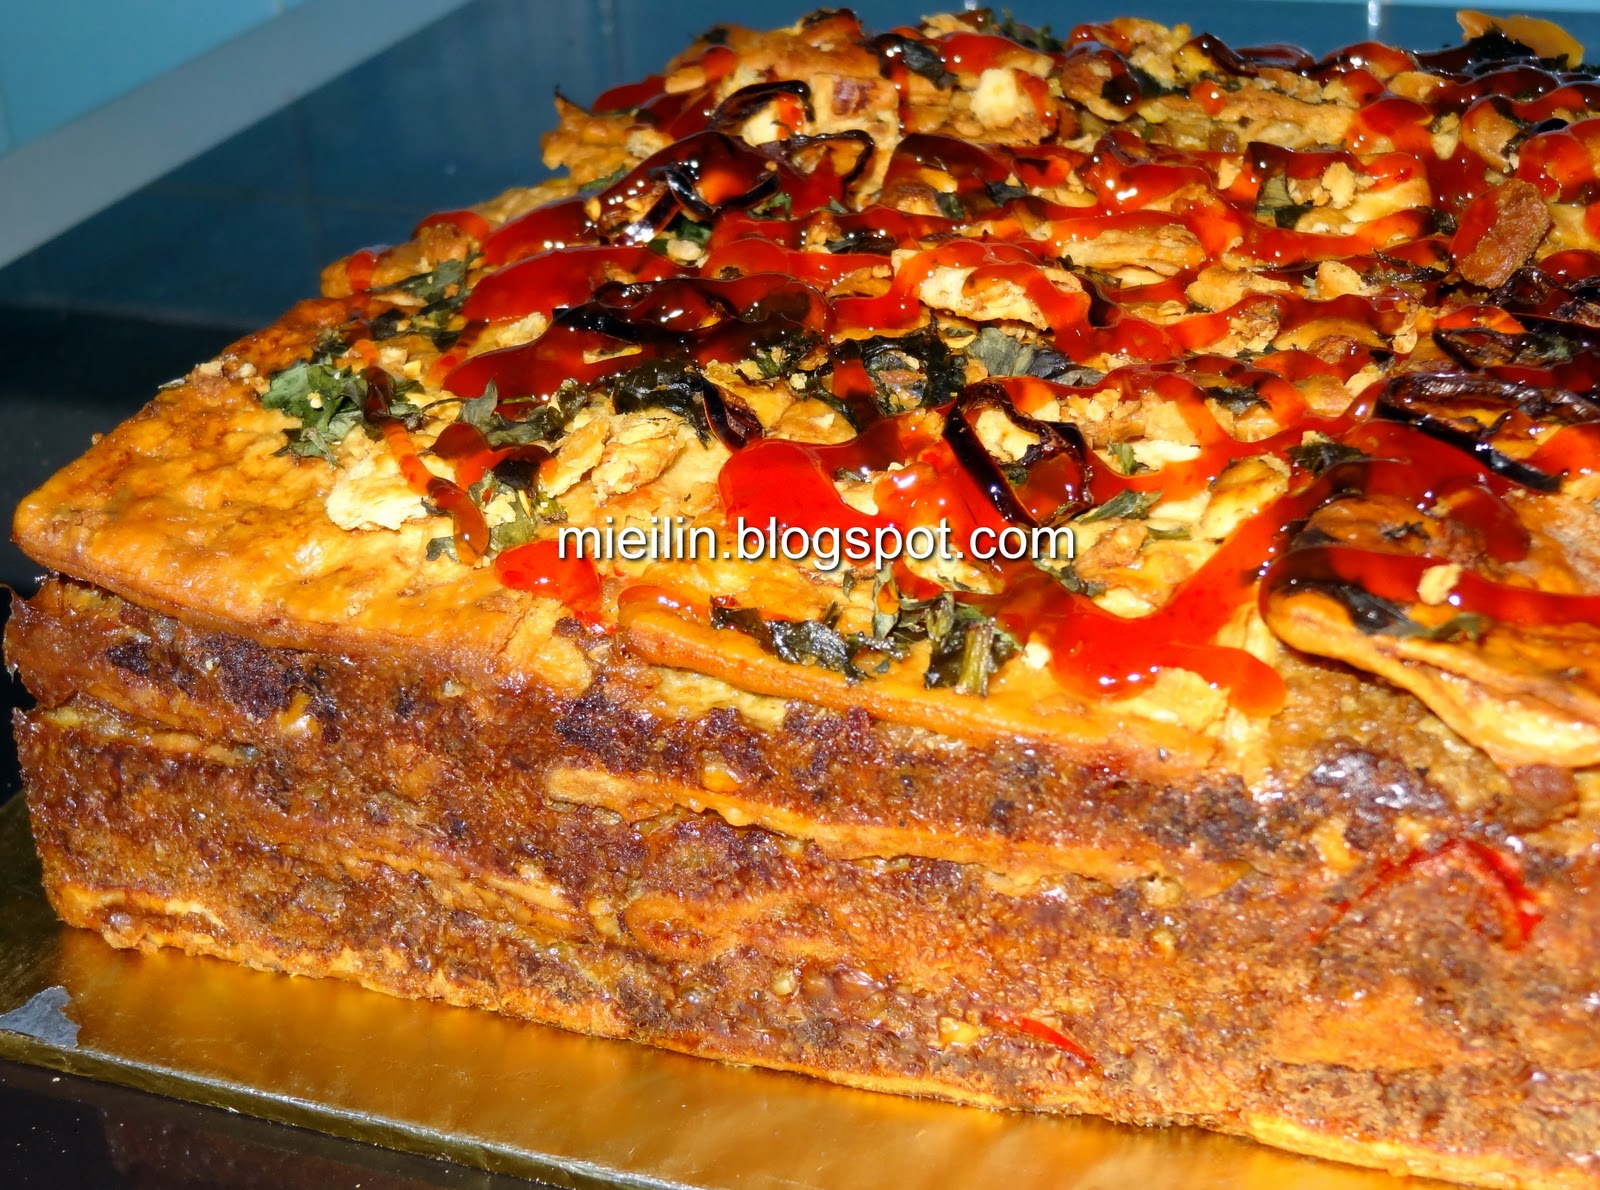 From MieIlin's Kitchen: 1st order - Murtabak Lapis Crackers